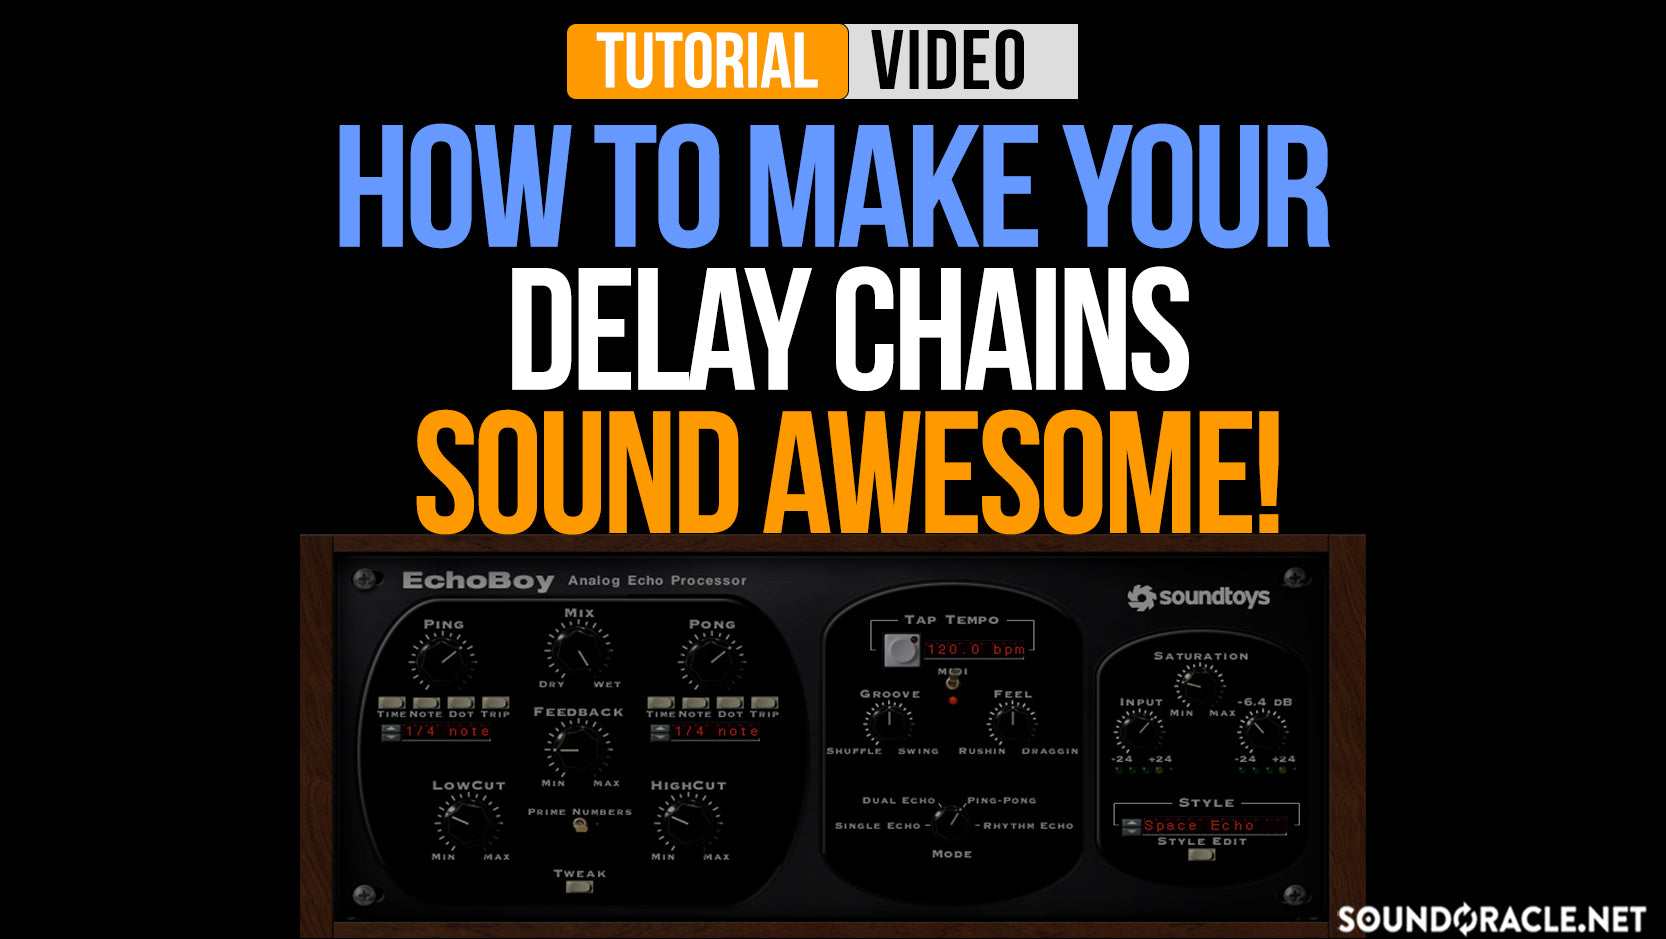 How To Make Your Delay Chains Sound Awesome!